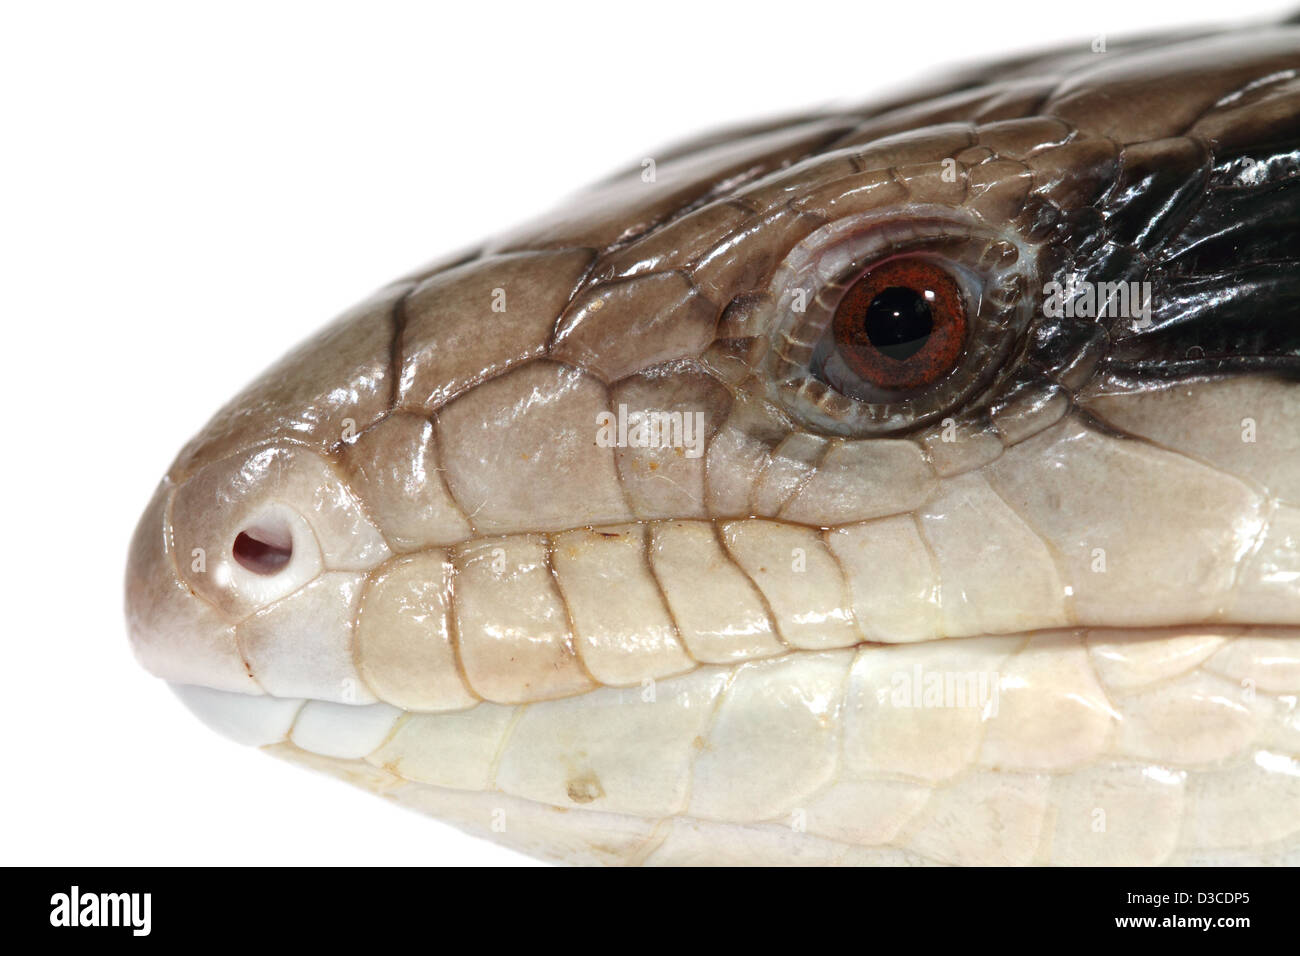 Blue-tongue lizard or skink, Tiliqua scincoides scincoides photographed in a studio suitable for cut-out Stock Photo